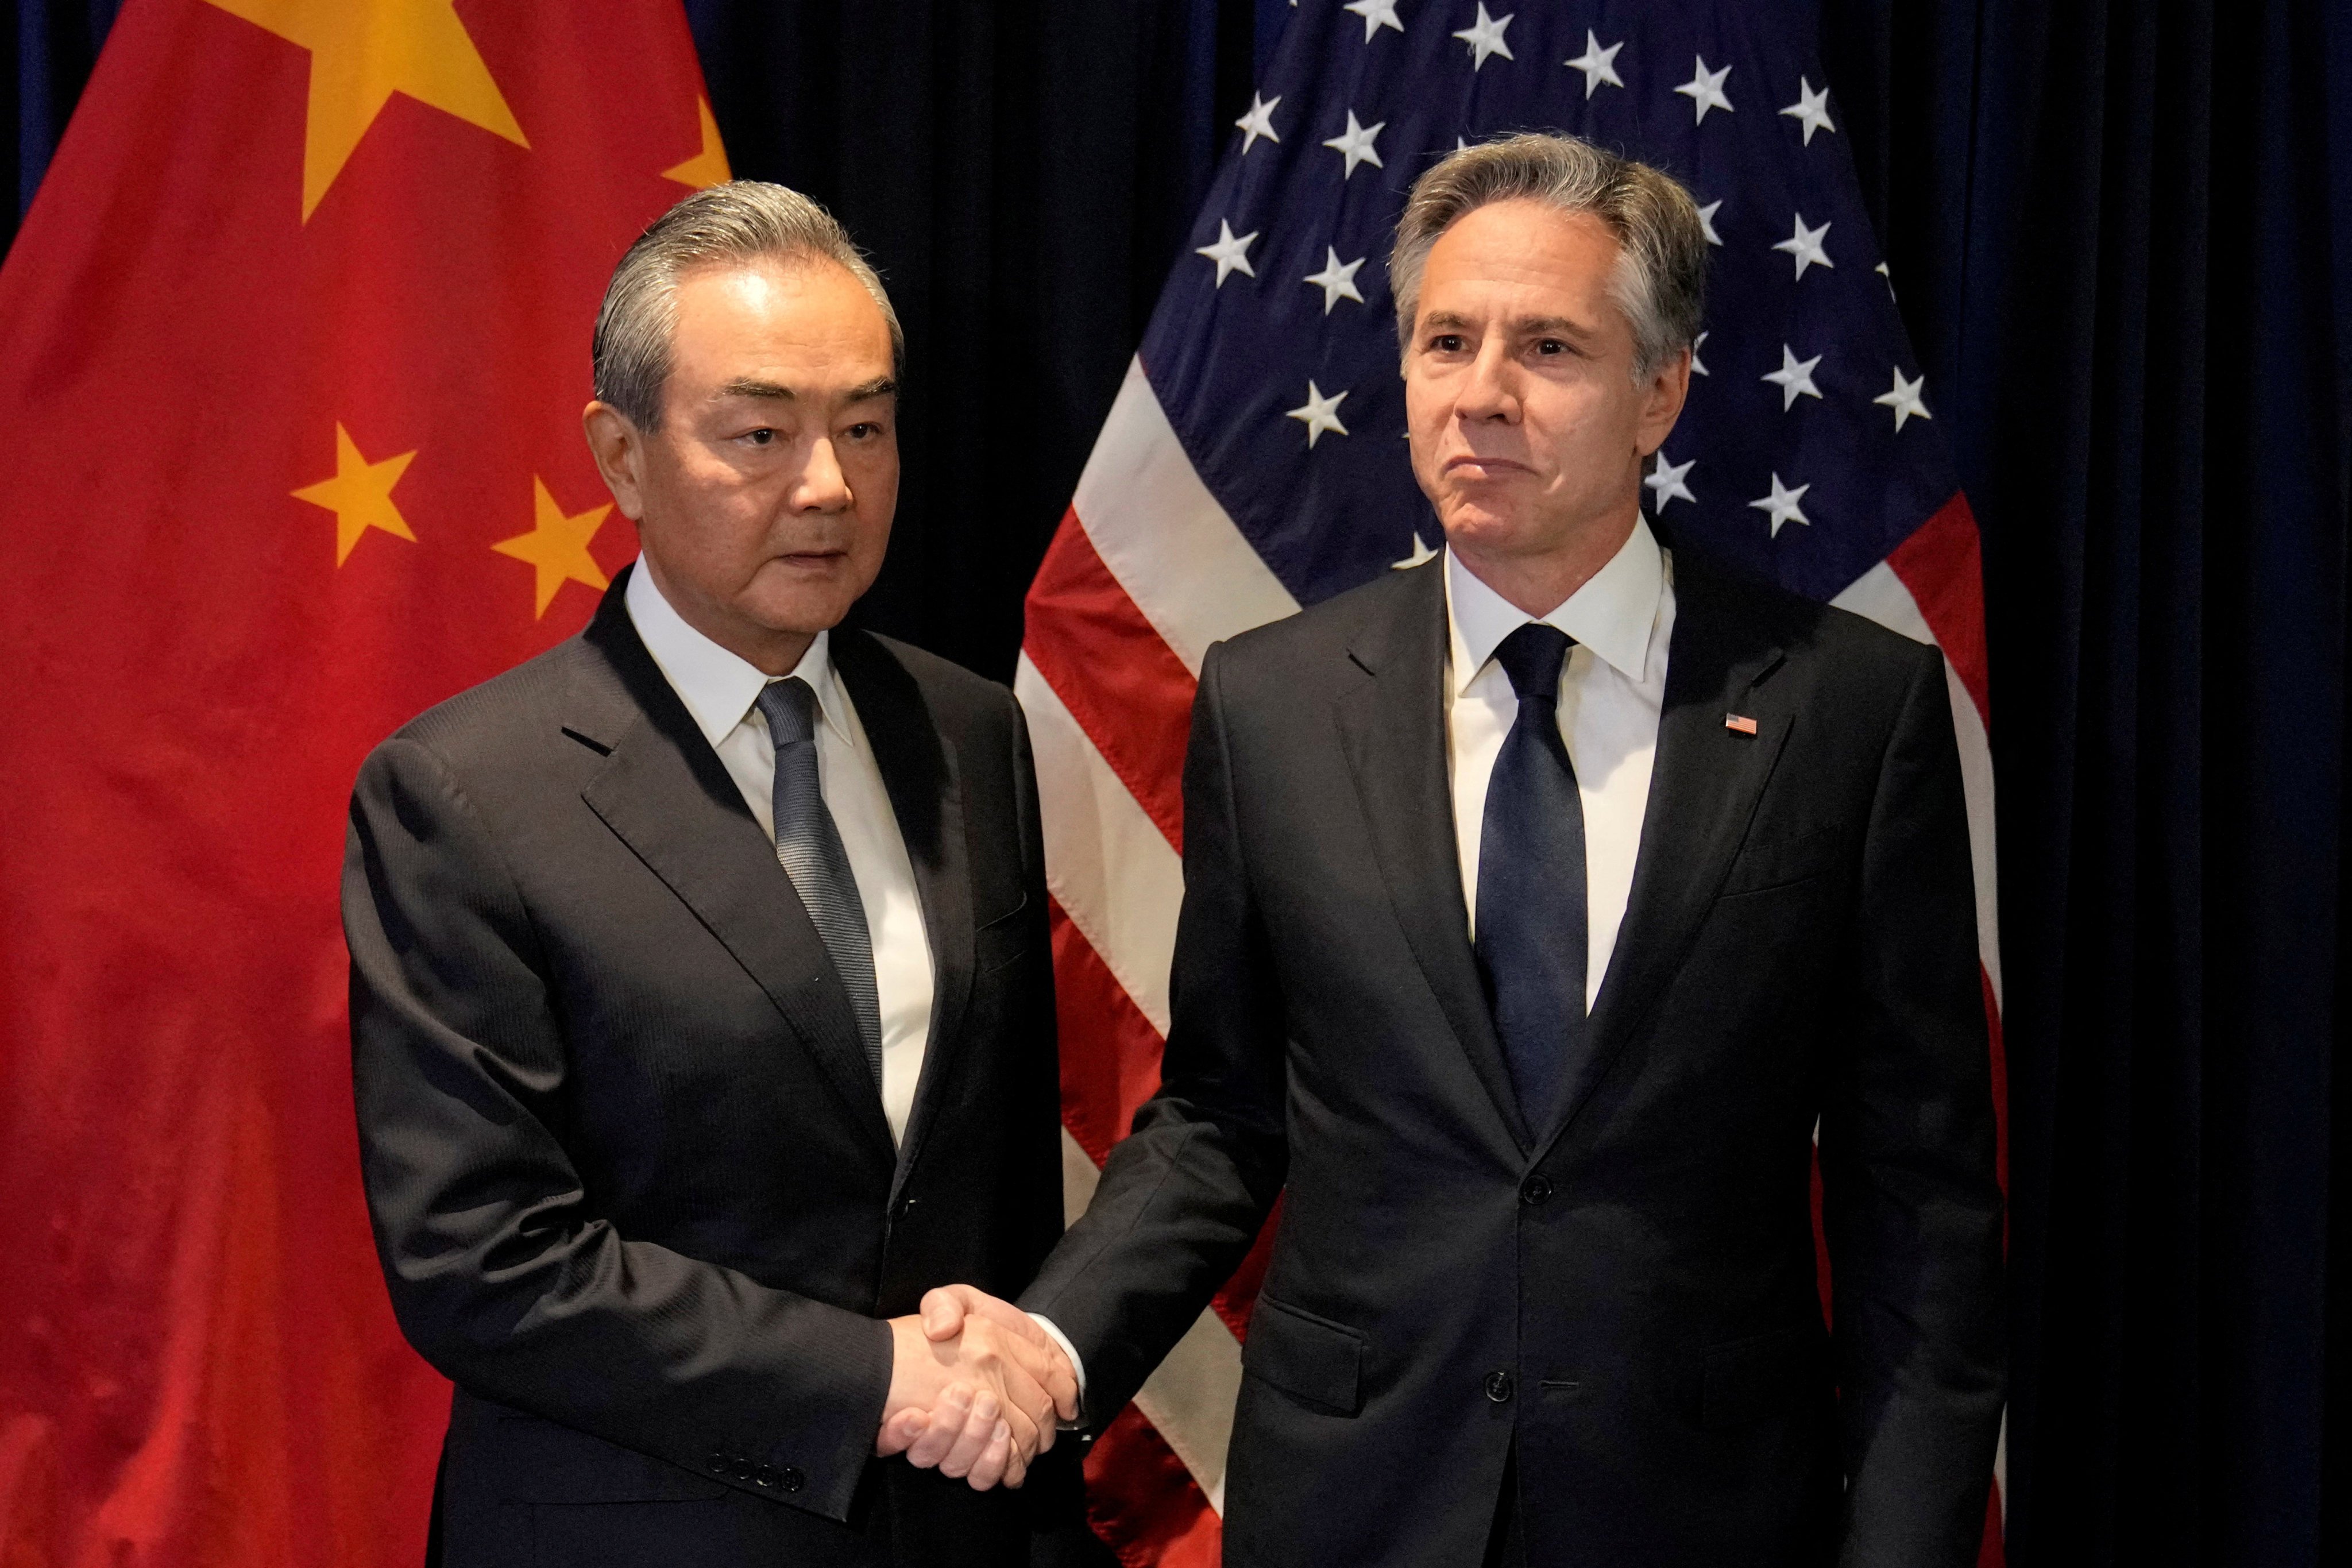 US Secretary of State Antony Blinken shakes hands with China’s foreign policy chief Wang Yi during their meeting on the sidelines of ASEAN in July. Photo: Reuters